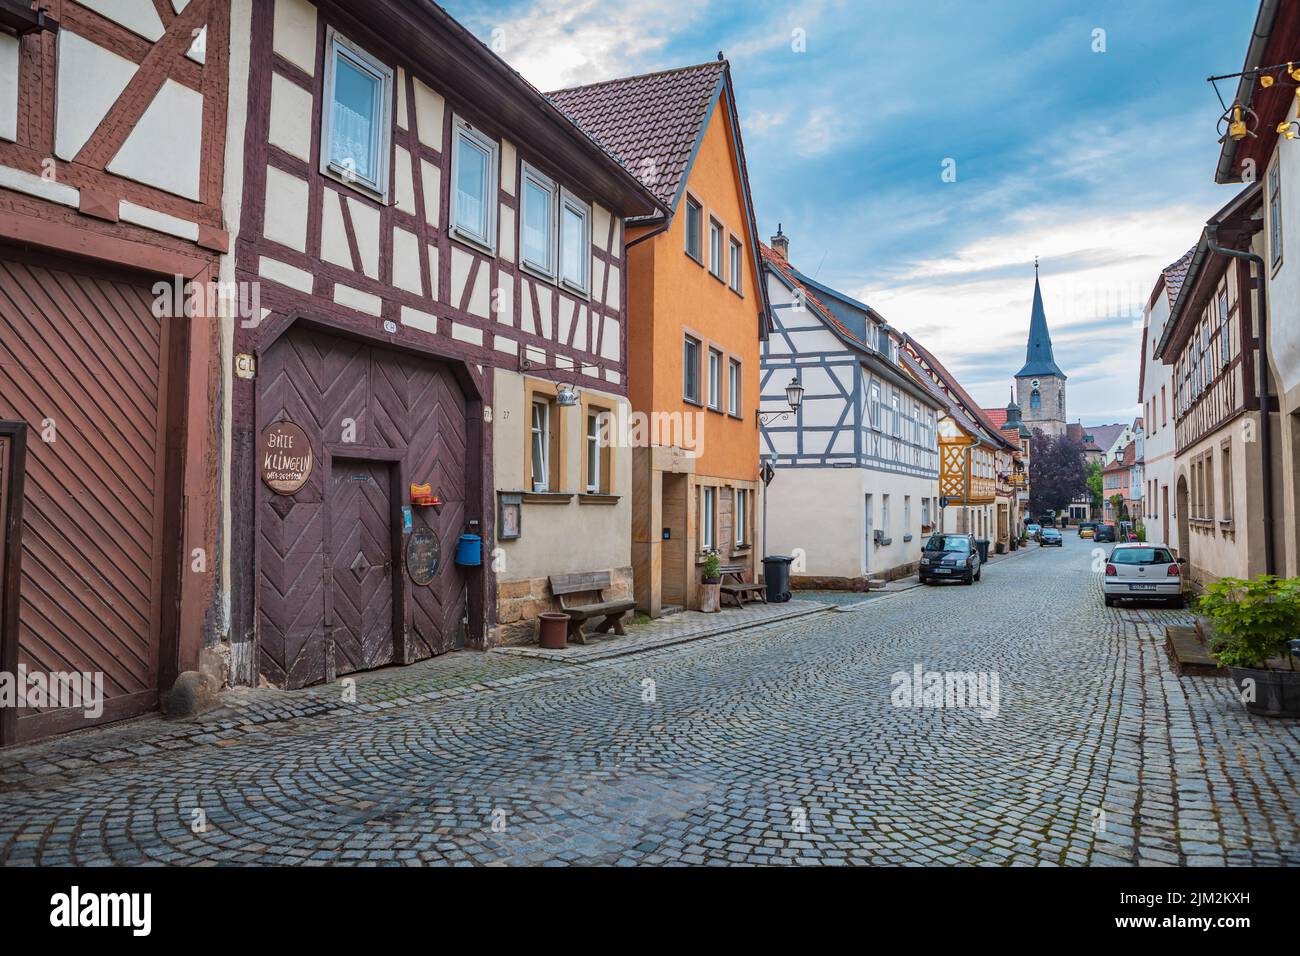 SESSLACH, BAVARIA, GERMANY - CIRCA MAY, 2022: The Luitpoldstrasse in Sesslach town, Germany. Stock Photo